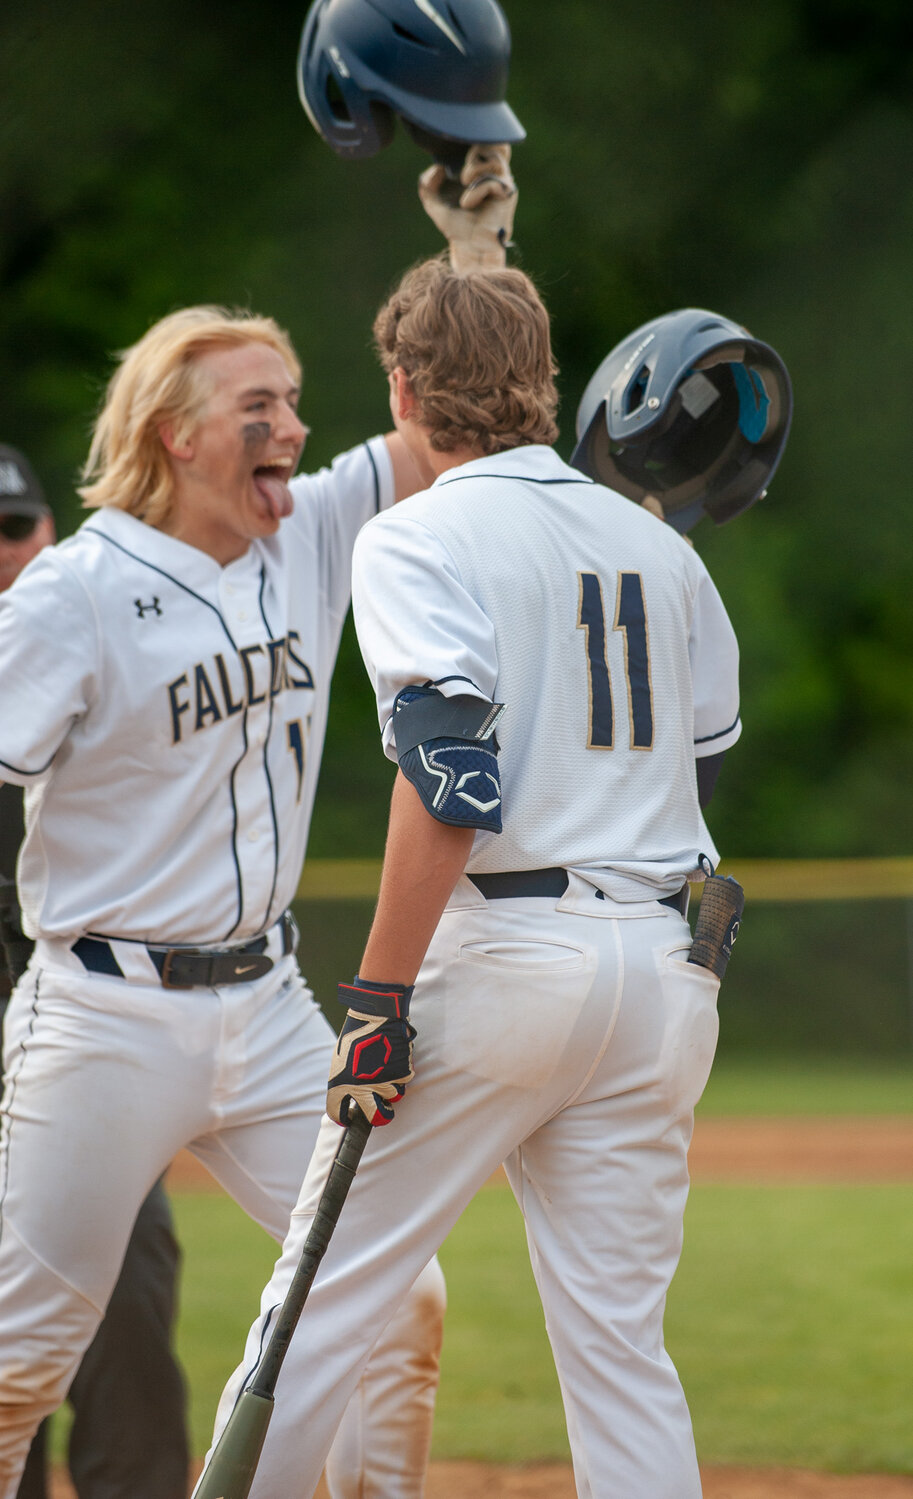 Kody Phillips (left) celebrated with Nate Clarke (11) after hitting a home run during the first inning.